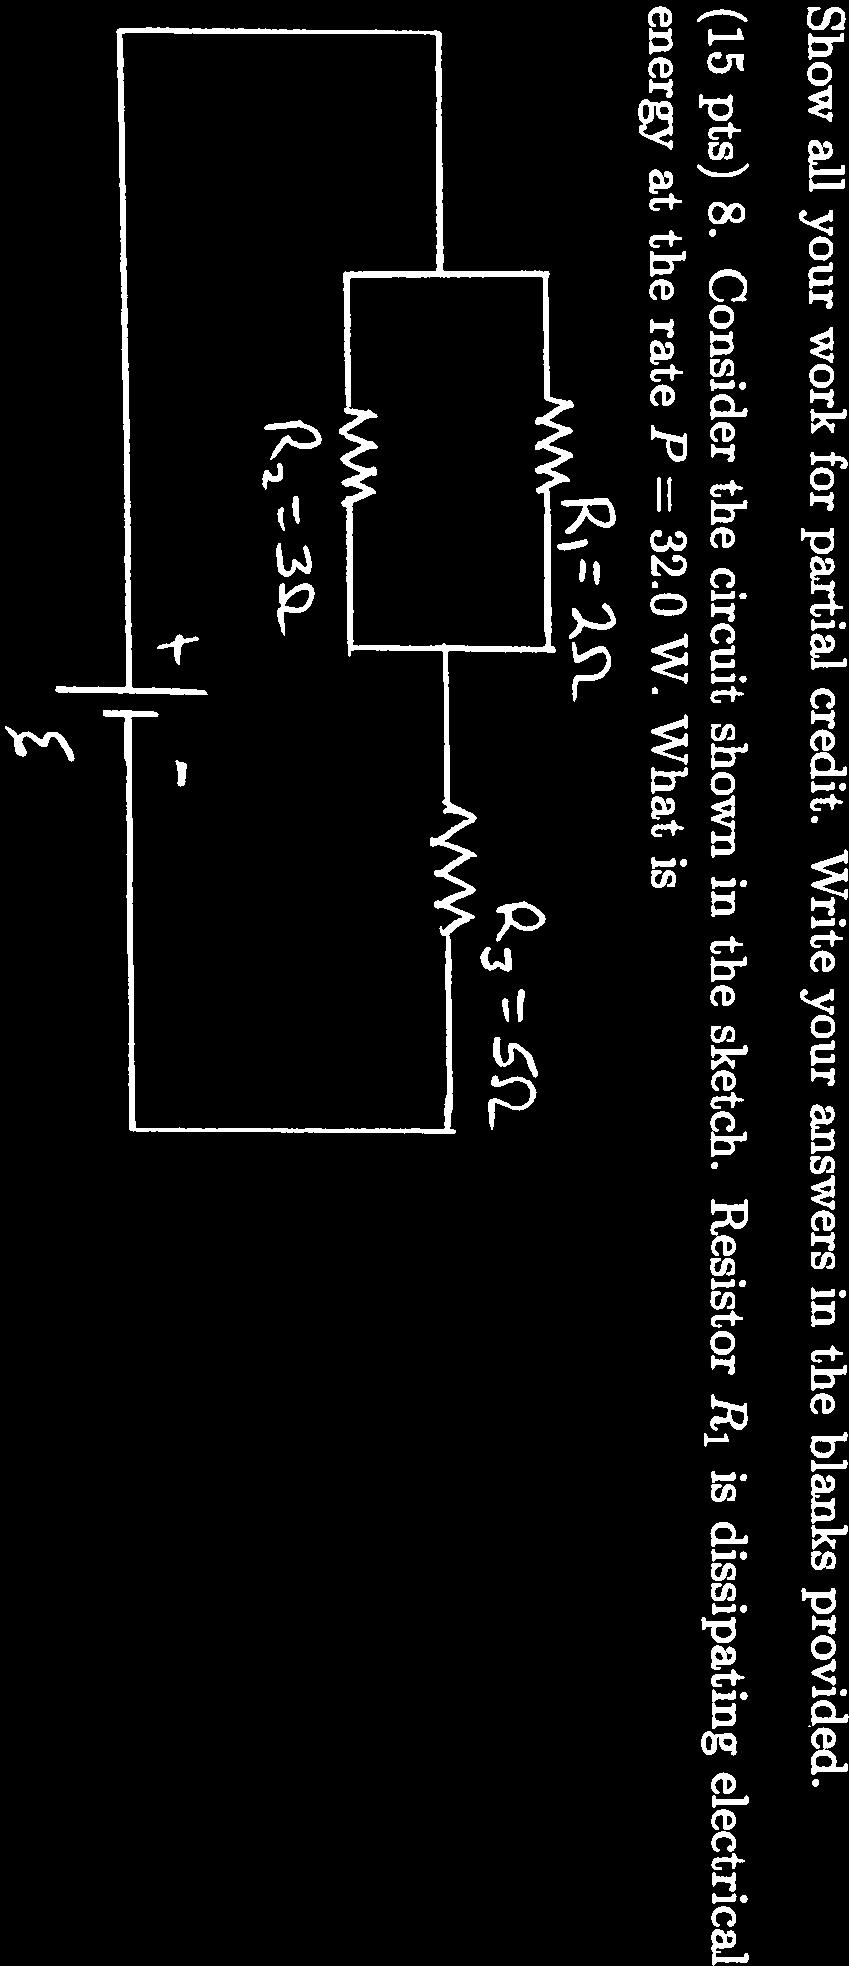 Show all your work for partial credit. Write your answers in the blanks provided. (15 pts) 8. Consider the circuit shown in the sketch.